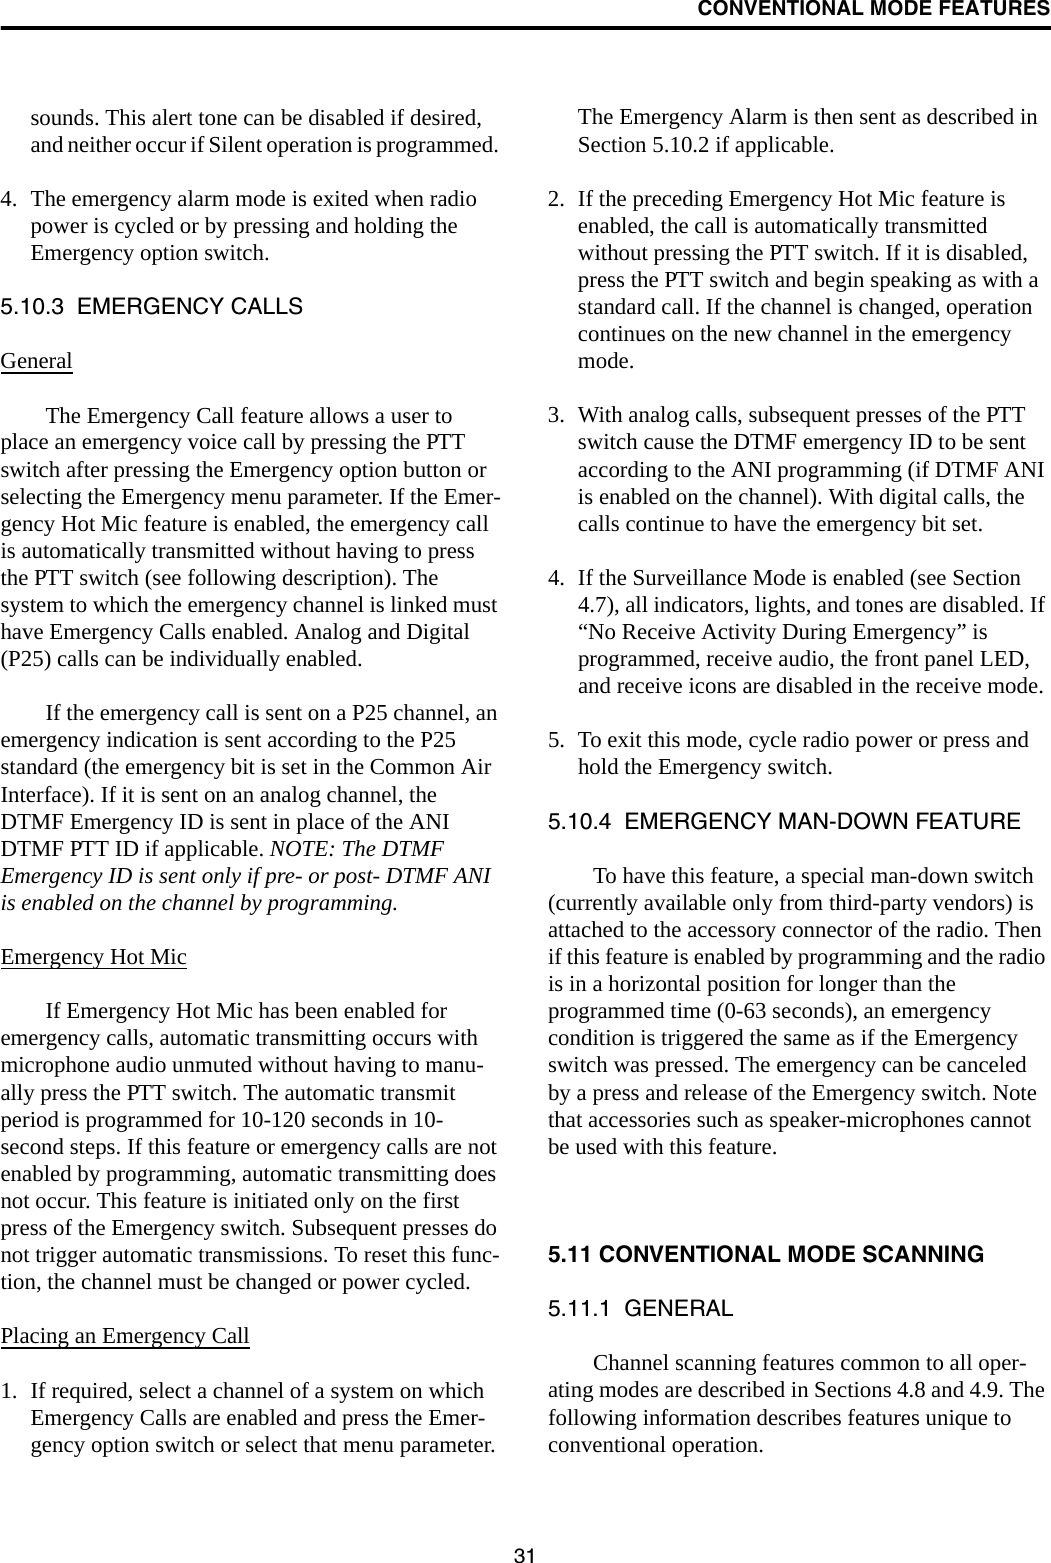 CONVENTIONAL MODE FEATURES31sounds. This alert tone can be disabled if desired, and neither occur if Silent operation is programmed. 4. The emergency alarm mode is exited when radio power is cycled or by pressing and holding the Emergency option switch. 5.10.3  EMERGENCY CALLSGeneralThe Emergency Call feature allows a user to place an emergency voice call by pressing the PTT switch after pressing the Emergency option button or selecting the Emergency menu parameter. If the Emer-gency Hot Mic feature is enabled, the emergency call is automatically transmitted without having to press the PTT switch (see following description). The system to which the emergency channel is linked must have Emergency Calls enabled. Analog and Digital (P25) calls can be individually enabled.If the emergency call is sent on a P25 channel, an emergency indication is sent according to the P25 standard (the emergency bit is set in the Common Air Interface). If it is sent on an analog channel, the DTMF Emergency ID is sent in place of the ANI DTMF PTT ID if applicable. NOTE: The DTMF Emergency ID is sent only if pre- or post- DTMF ANI is enabled on the channel by programming.Emergency Hot MicIf Emergency Hot Mic has been enabled for emergency calls, automatic transmitting occurs with microphone audio unmuted without having to manu-ally press the PTT switch. The automatic transmit period is programmed for 10-120 seconds in 10-second steps. If this feature or emergency calls are not enabled by programming, automatic transmitting does not occur. This feature is initiated only on the first press of the Emergency switch. Subsequent presses do not trigger automatic transmissions. To reset this func-tion, the channel must be changed or power cycled.Placing an Emergency Call1. If required, select a channel of a system on which Emergency Calls are enabled and press the Emer-gency option switch or select that menu parameter. The Emergency Alarm is then sent as described in Section 5.10.2 if applicable.2. If the preceding Emergency Hot Mic feature is enabled, the call is automatically transmitted without pressing the PTT switch. If it is disabled, press the PTT switch and begin speaking as with a standard call. If the channel is changed, operation continues on the new channel in the emergency mode.3. With analog calls, subsequent presses of the PTT switch cause the DTMF emergency ID to be sent according to the ANI programming (if DTMF ANI is enabled on the channel). With digital calls, the calls continue to have the emergency bit set.4. If the Surveillance Mode is enabled (see Section 4.7), all indicators, lights, and tones are disabled. If “No Receive Activity During Emergency” is programmed, receive audio, the front panel LED, and receive icons are disabled in the receive mode.5. To exit this mode, cycle radio power or press and hold the Emergency switch.5.10.4  EMERGENCY MAN-DOWN FEATURETo have this feature, a special man-down switch (currently available only from third-party vendors) is attached to the accessory connector of the radio. Then if this feature is enabled by programming and the radio is in a horizontal position for longer than the programmed time (0-63 seconds), an emergency condition is triggered the same as if the Emergency switch was pressed. The emergency can be canceled by a press and release of the Emergency switch. Note that accessories such as speaker-microphones cannot be used with this feature. 5.11 CONVENTIONAL MODE SCANNING5.11.1  GENERALChannel scanning features common to all oper-ating modes are described in Sections 4.8 and 4.9. The following information describes features unique to conventional operation.